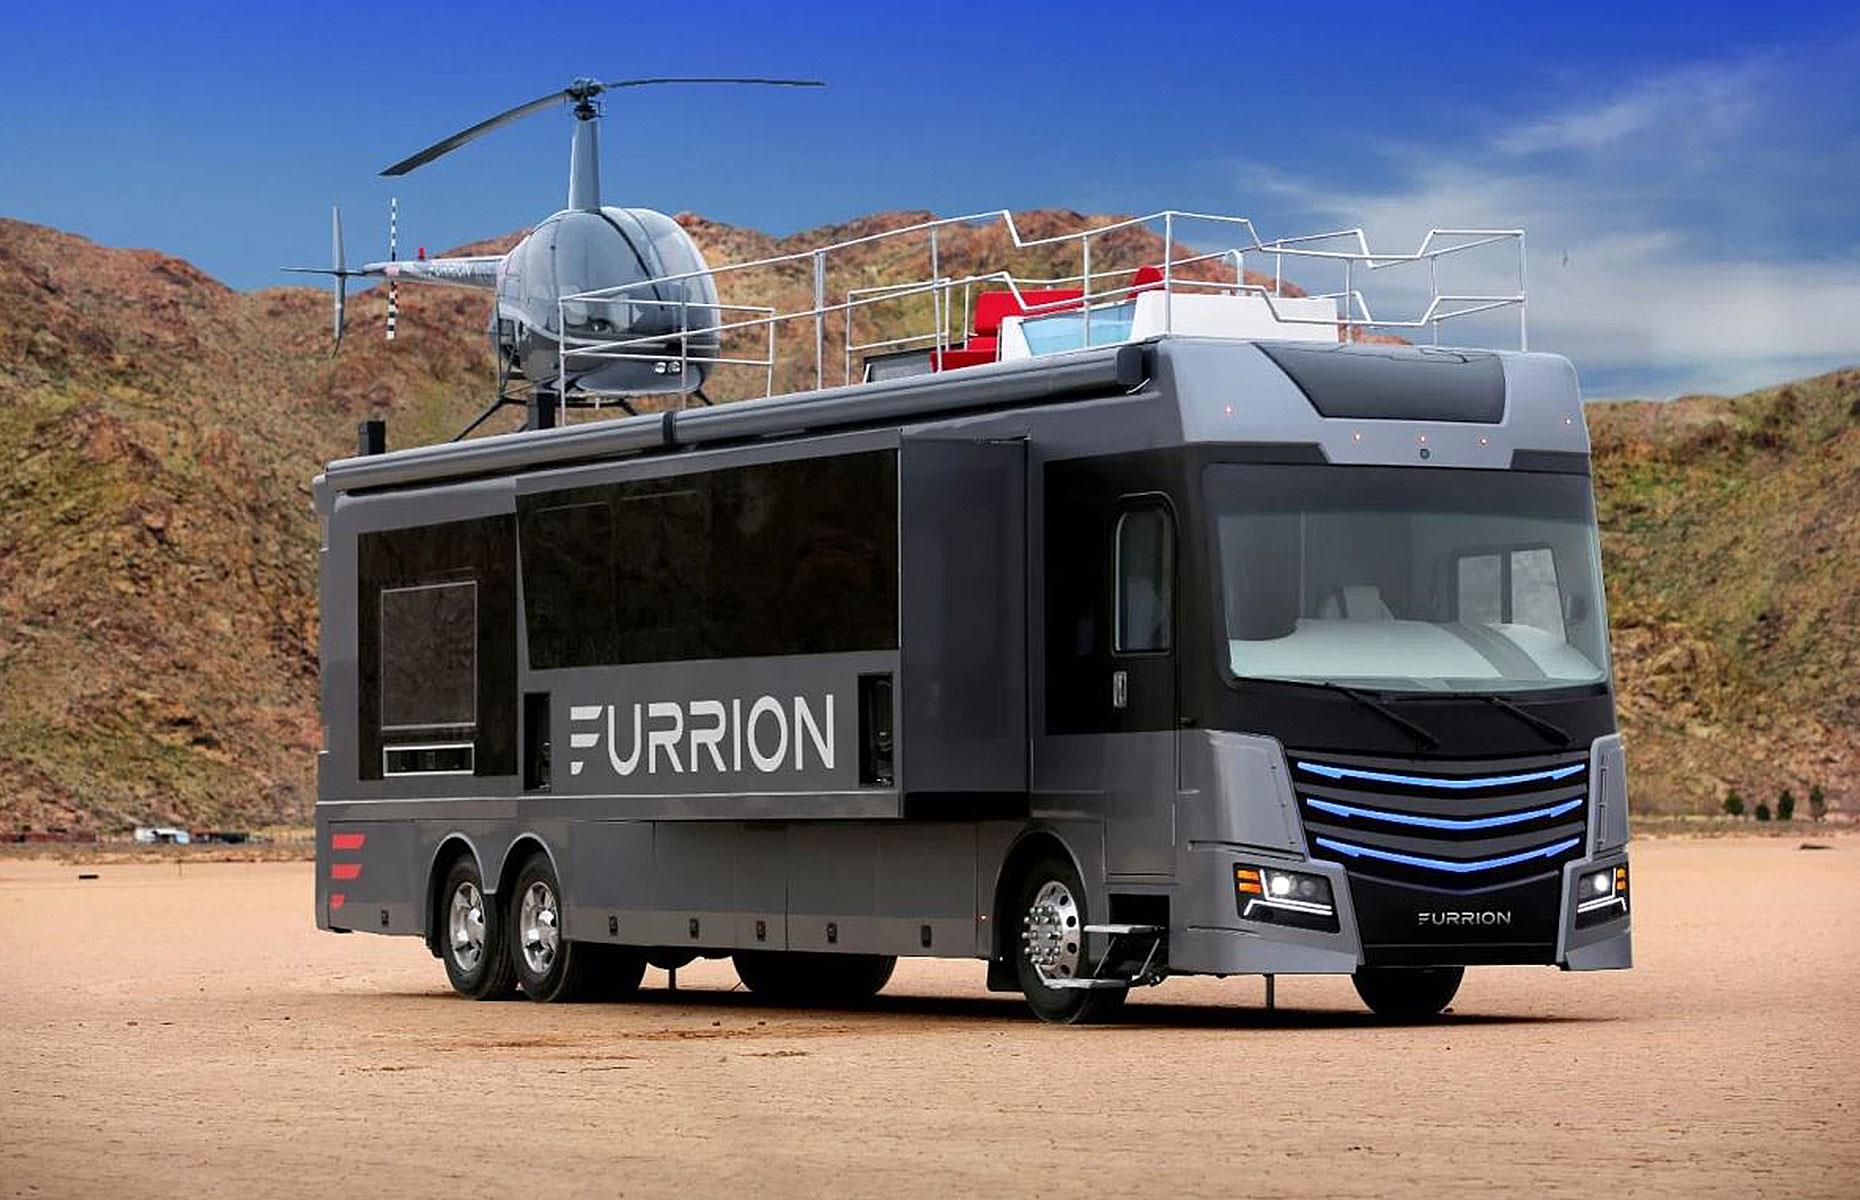 <p>The <a href="https://furrion.com/pages/design">Furrion Elysium</a> might be a concept vehicle, but its magnificent design truly redefines the luxury mobile lifestyle. Thanks to its decadent fixtures, this glamorous RV is worth a staggering $2.5 million. For this hefty sum, the <a href="https://www.loveproperty.com/gallerylist/80481/8-fly-in-homes-for-sale-where-you-can-park-your-plane">plush fly-in home </a>comes with a private rooftop helipad, a helicopter and a hot tub.</p>